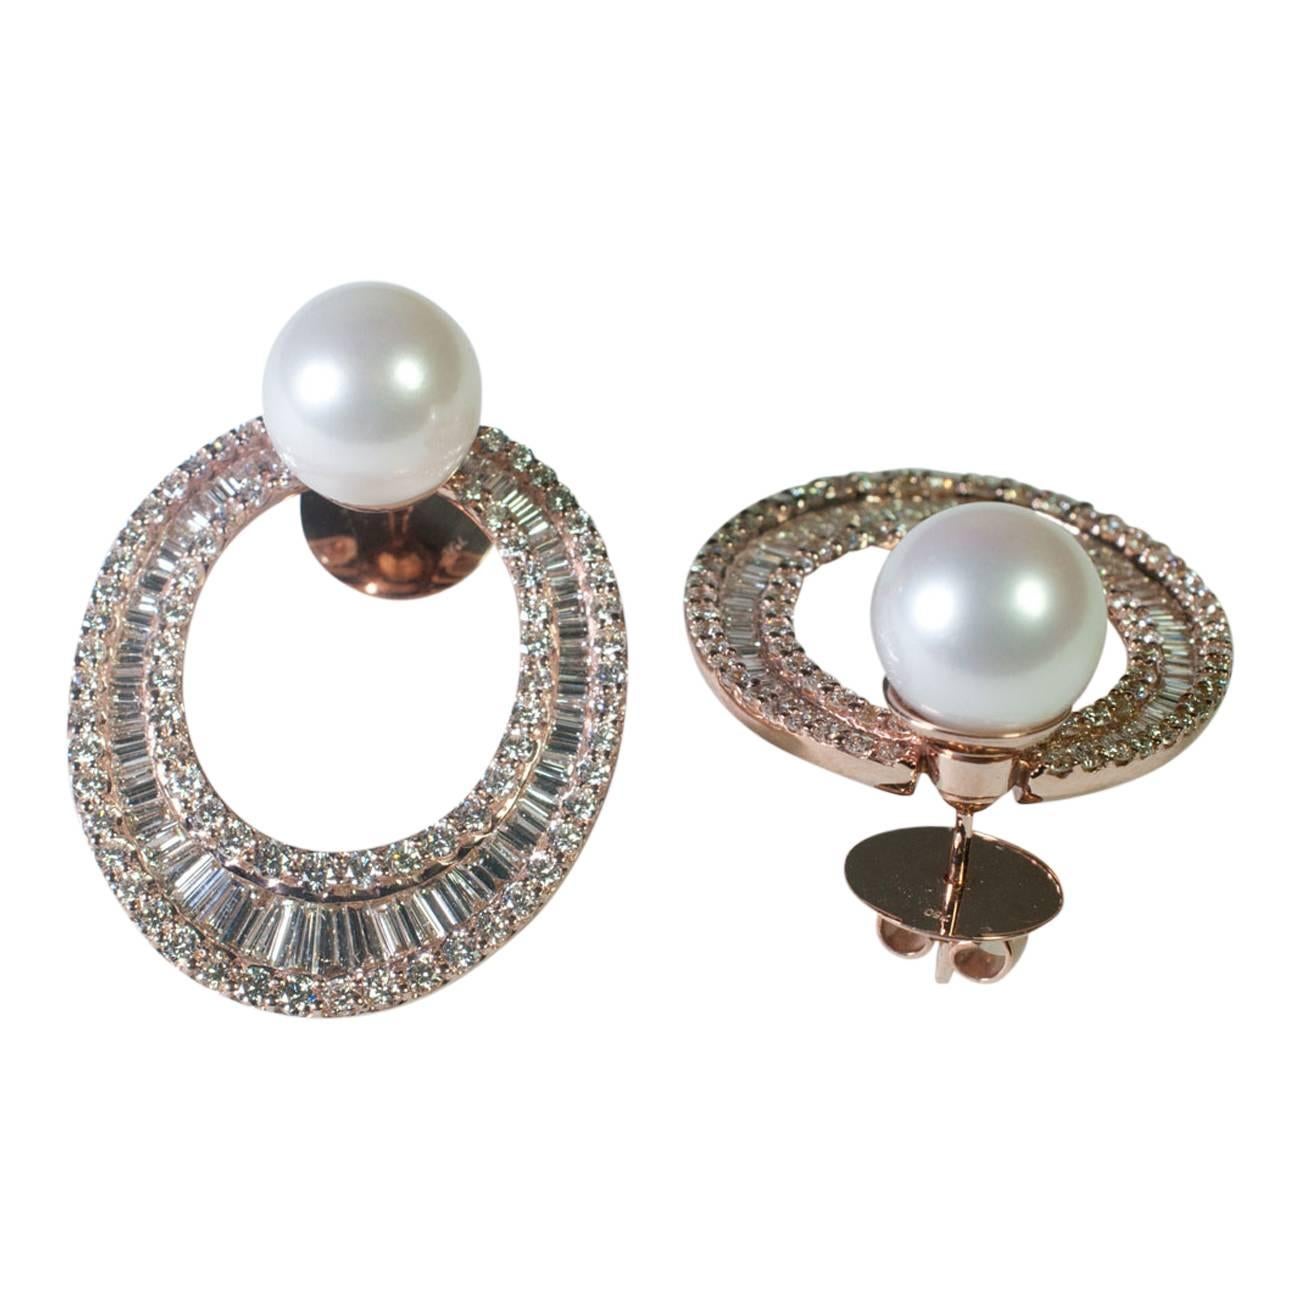 Big, bold and dramatic hooped earrings set with 9 cts of brilliant and graduated  baguette diamonds forming a large hoop with a 10mm white South Sea pearl sitting at the top.  They are mounted in luxurious pink gold with posts and secured by extra